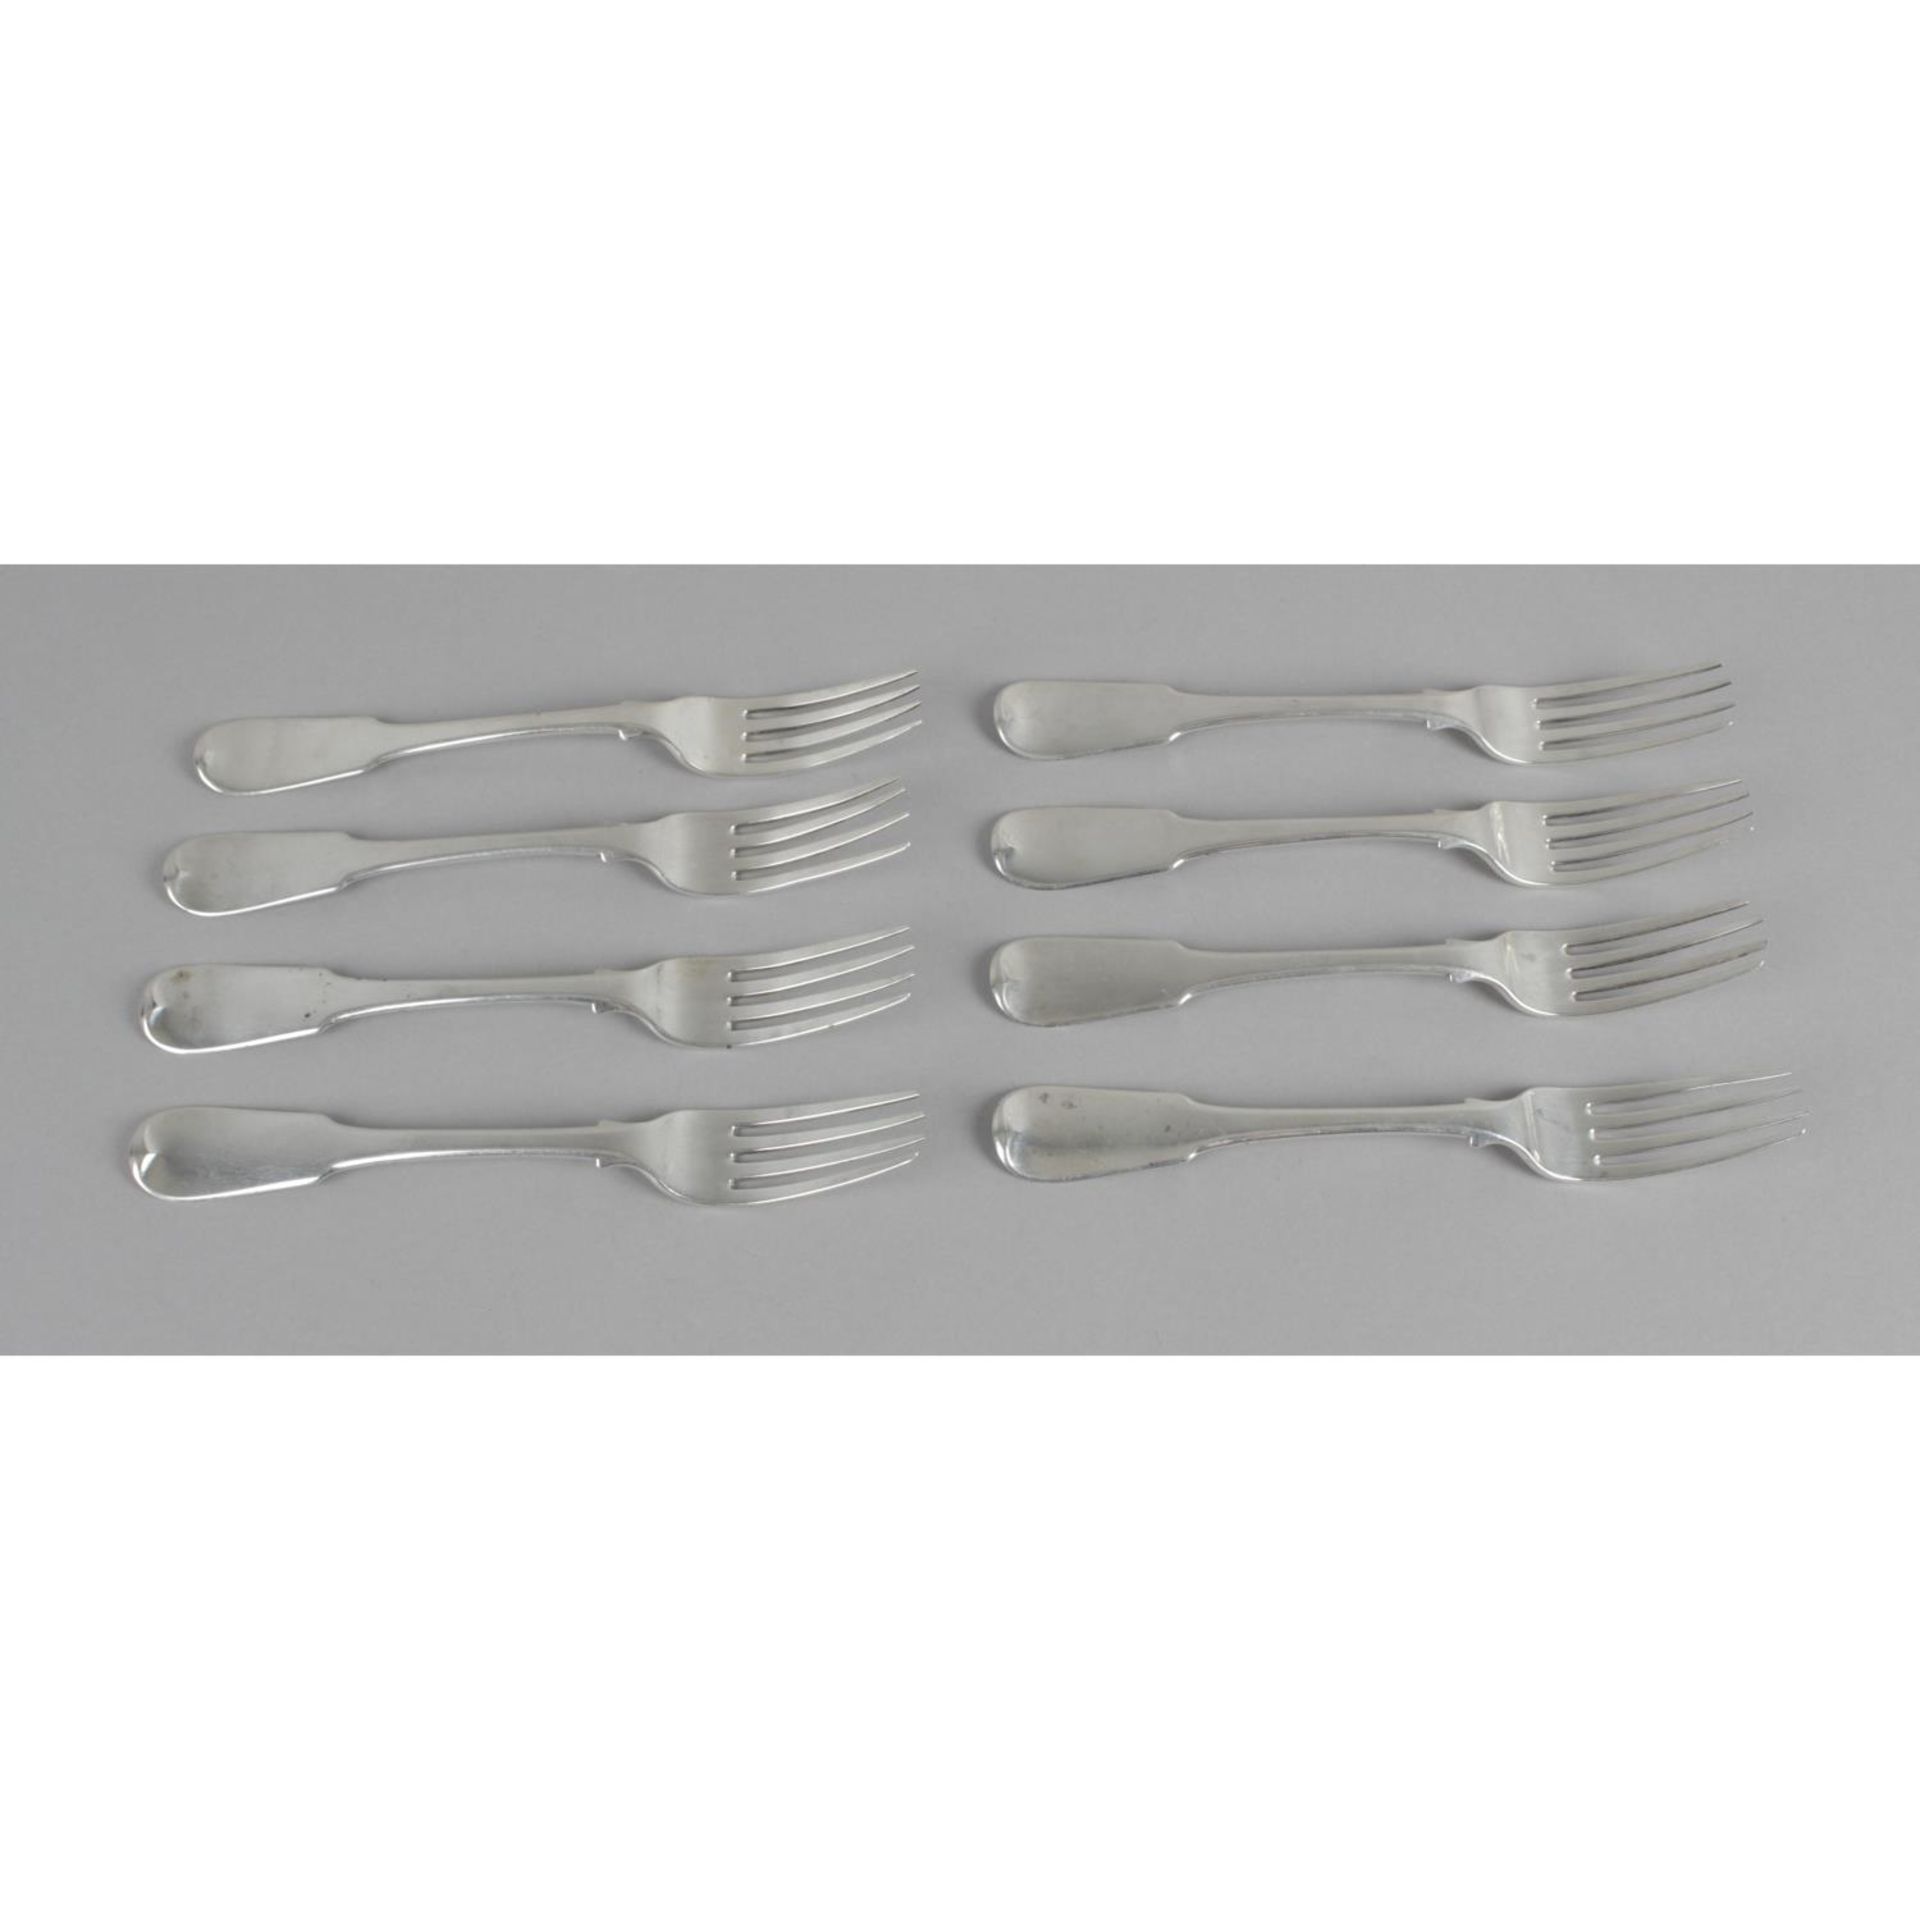 A selection of Scottish silver spoons and forks, - Image 6 of 6